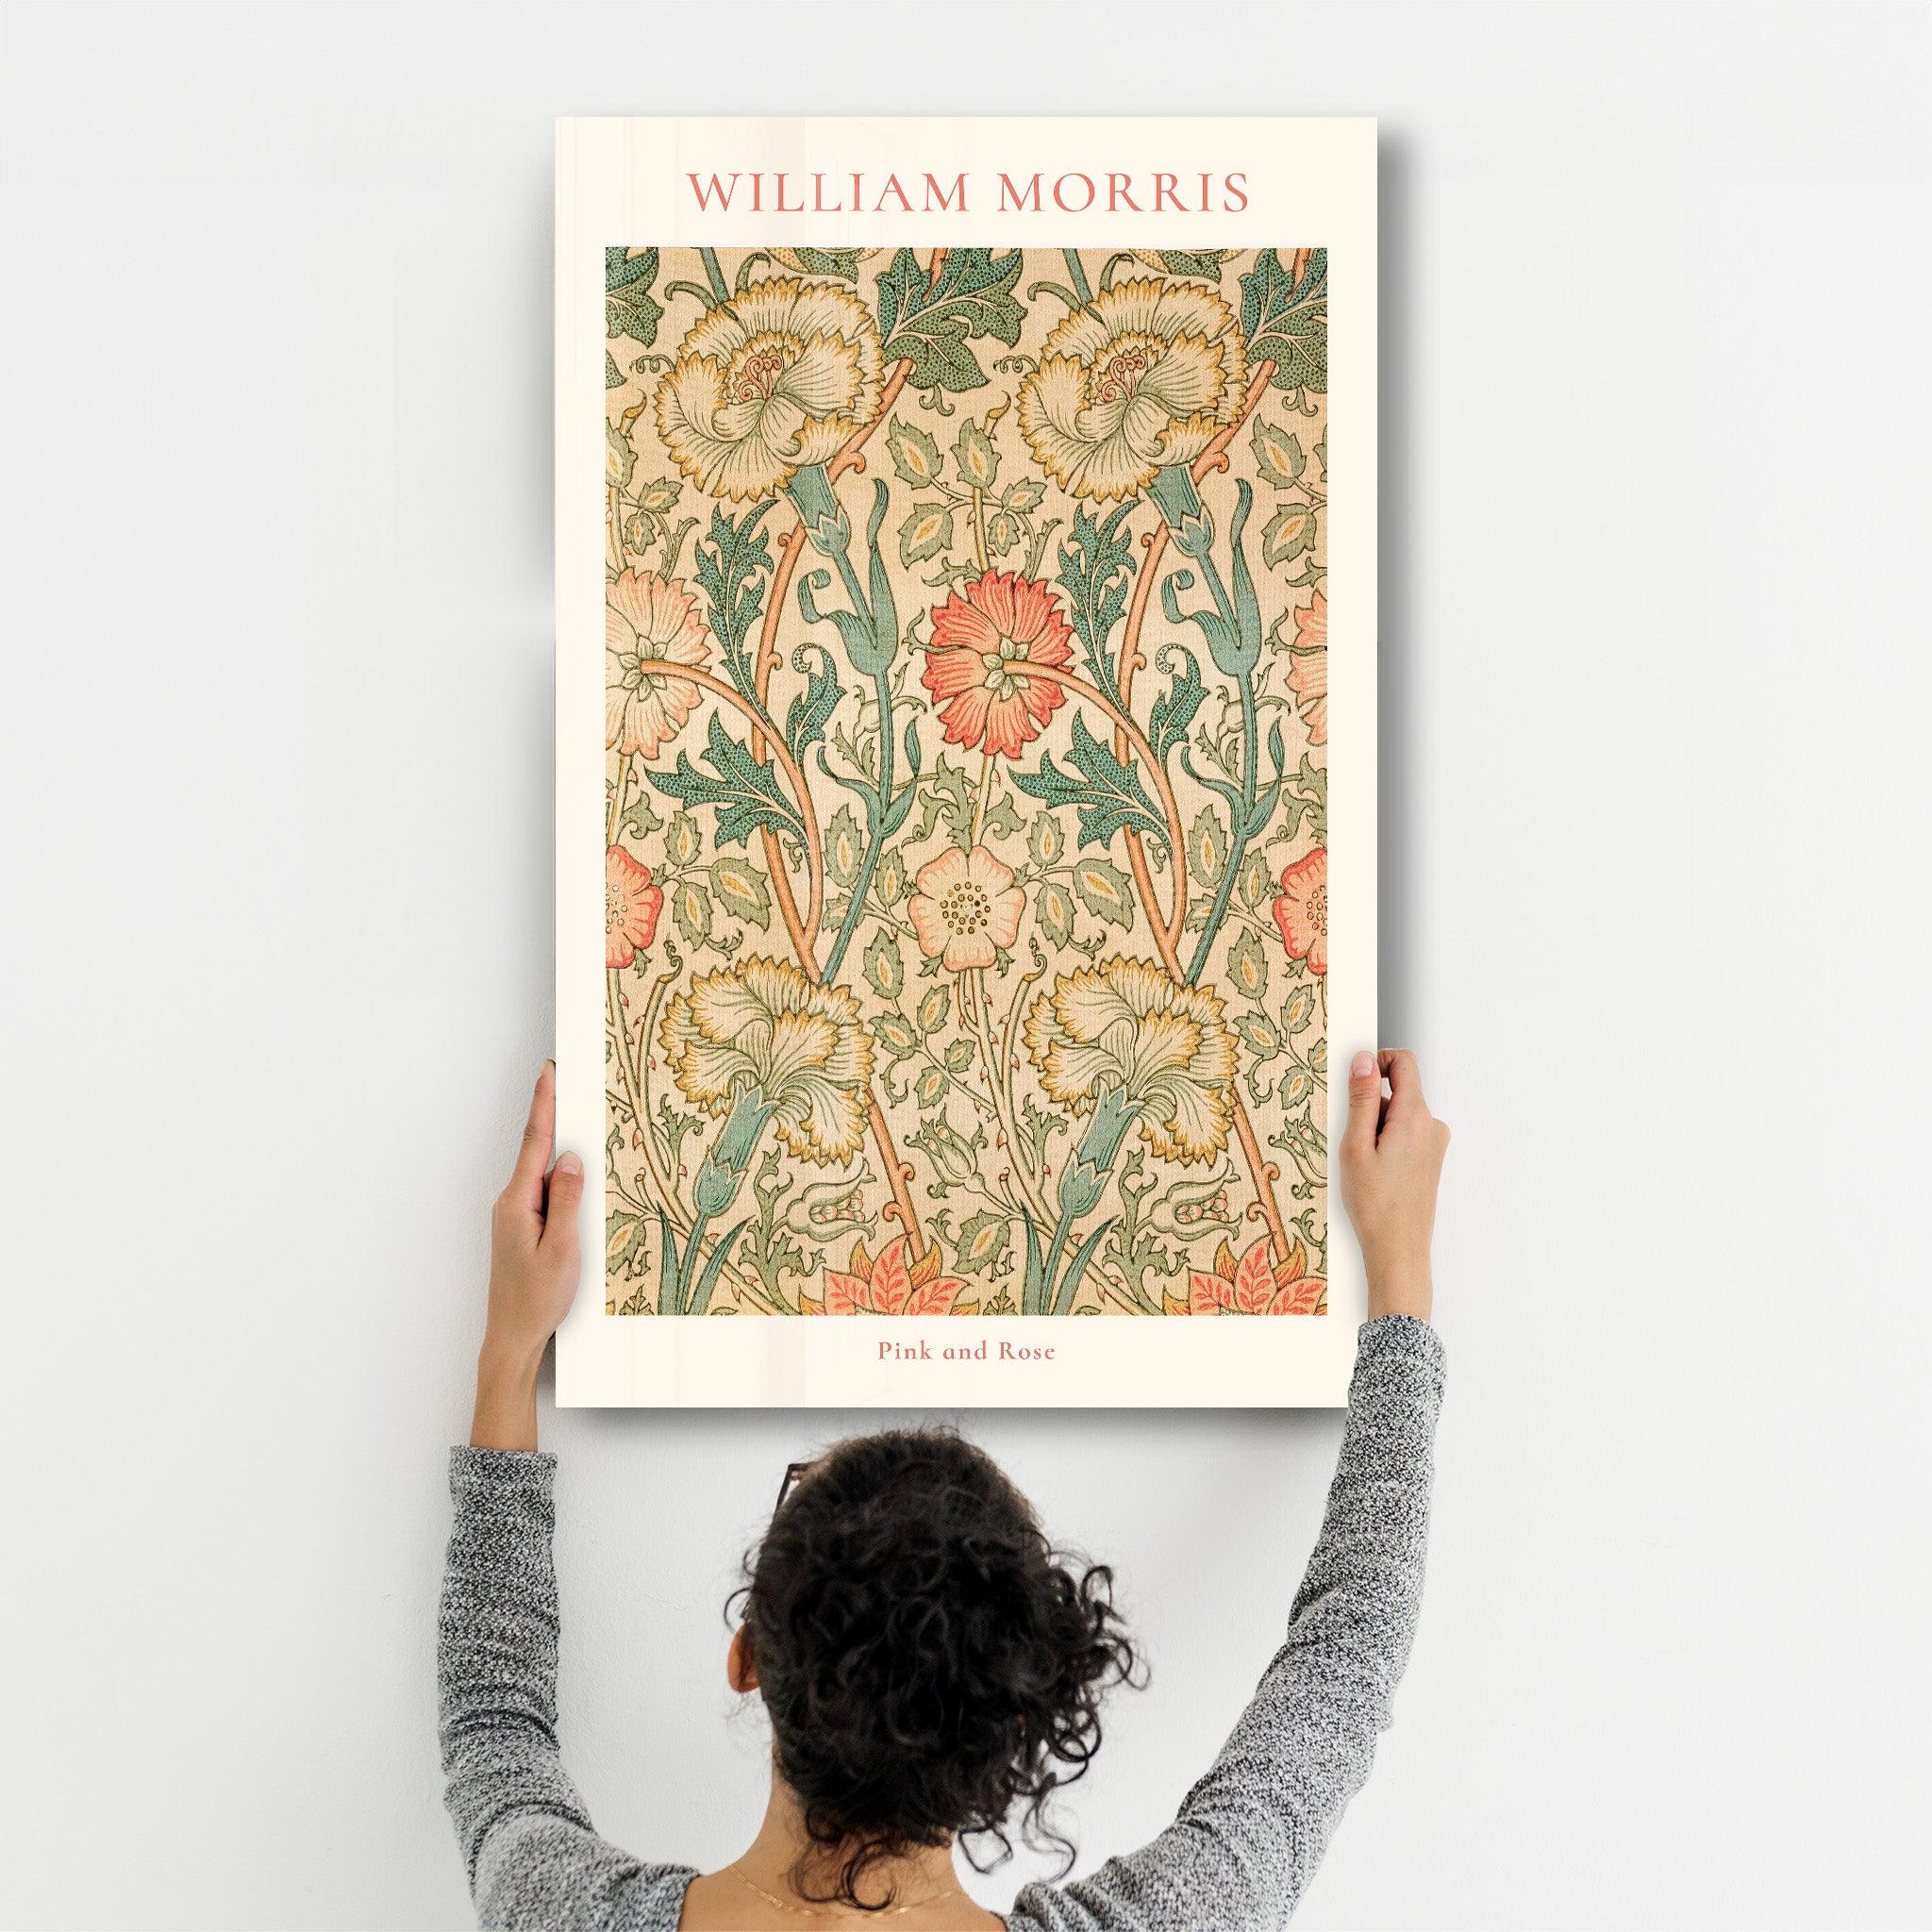 William Morris - Pink and Rose | Gallery Print Collection Glass Wall Art - ArtDesigna Glass Printing Wall Art